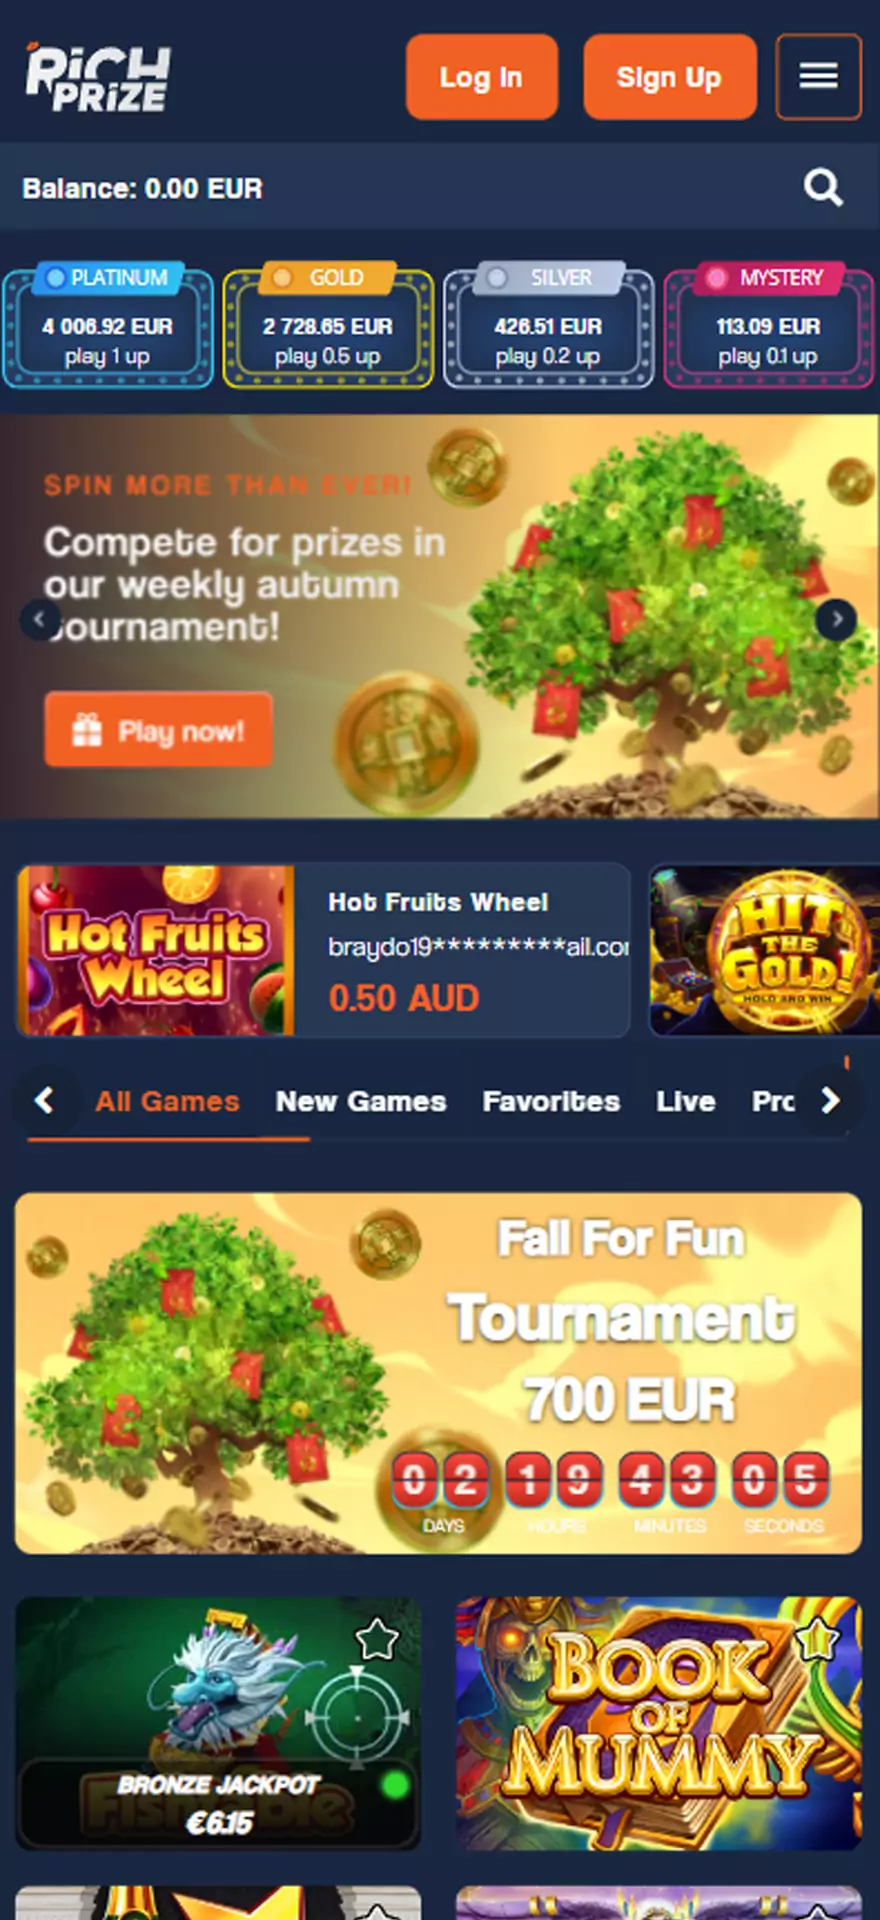 Choose your entertainment on main page.